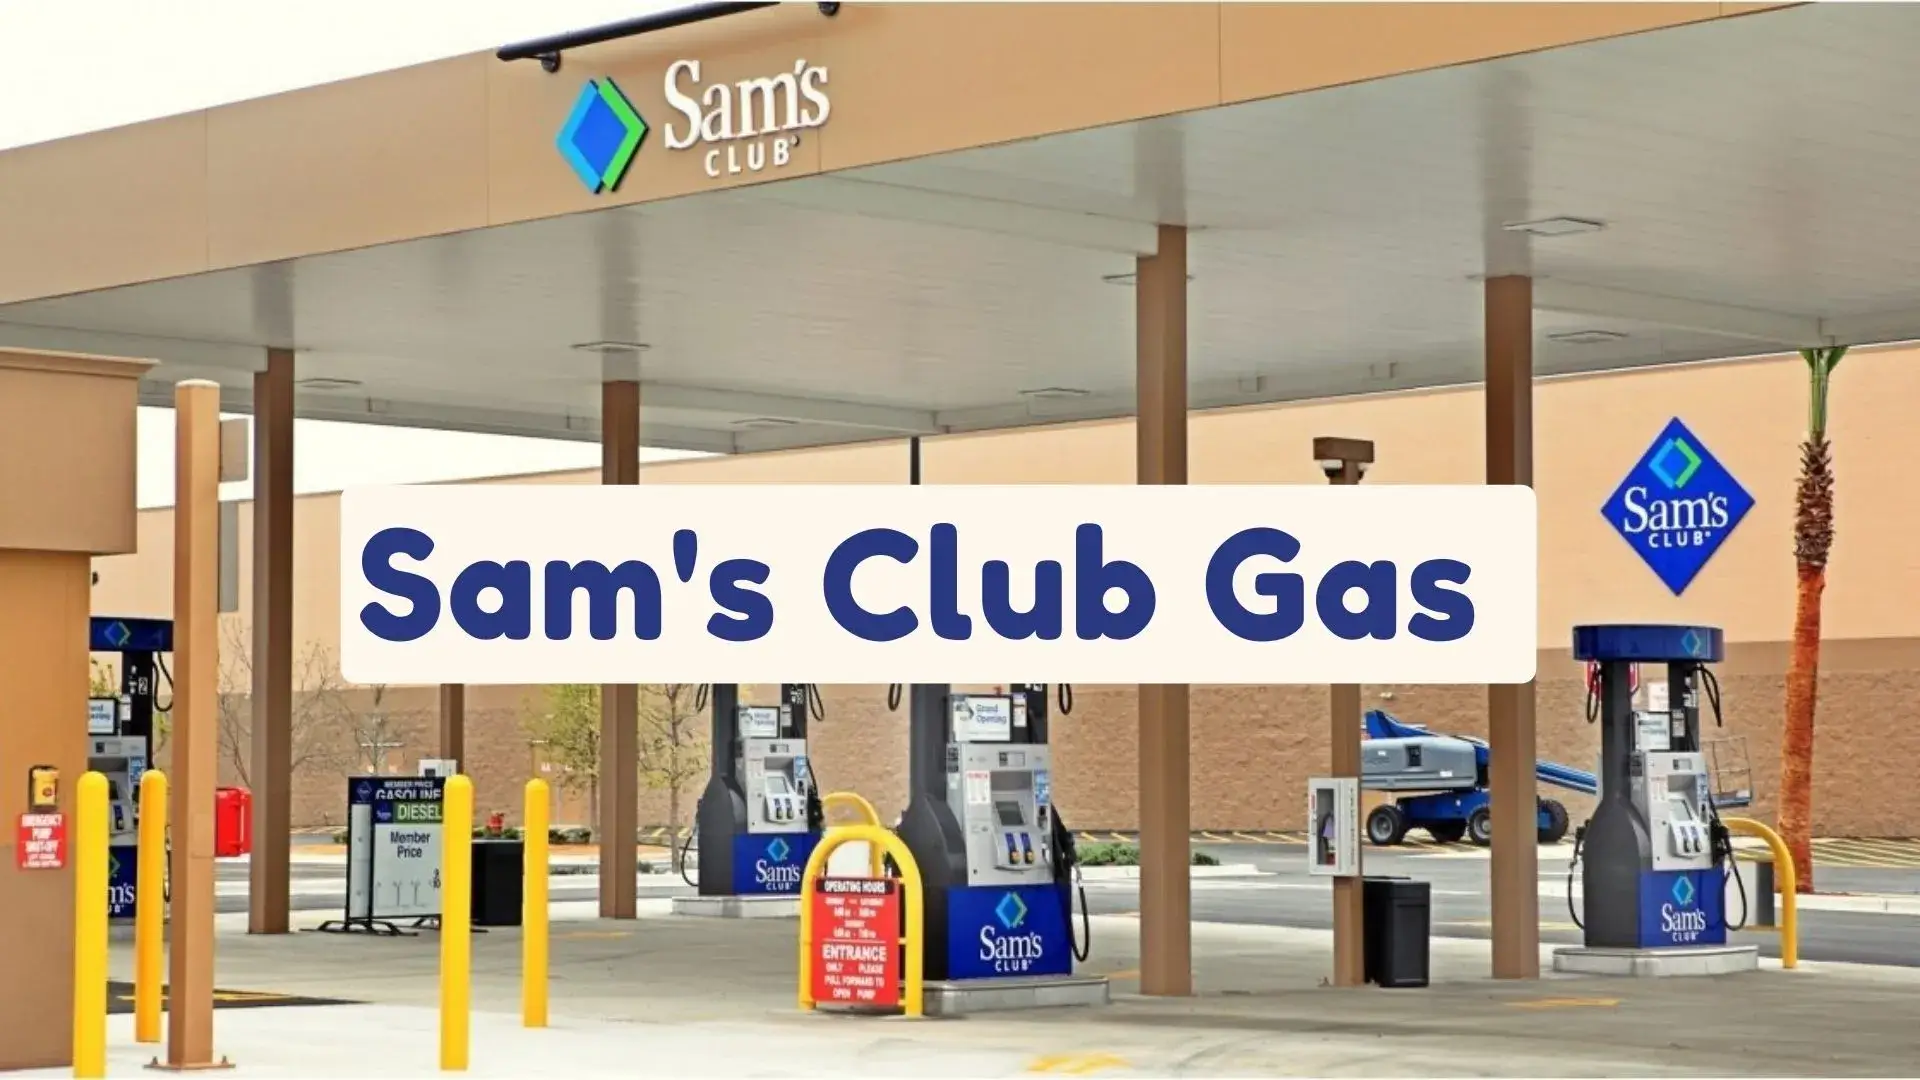 Are You Searching For Sam's Gas Hours Near To You | Then Read This Ultimate Guide To Find Sams Gas Hours, Gas Prices & Near Me Locations.